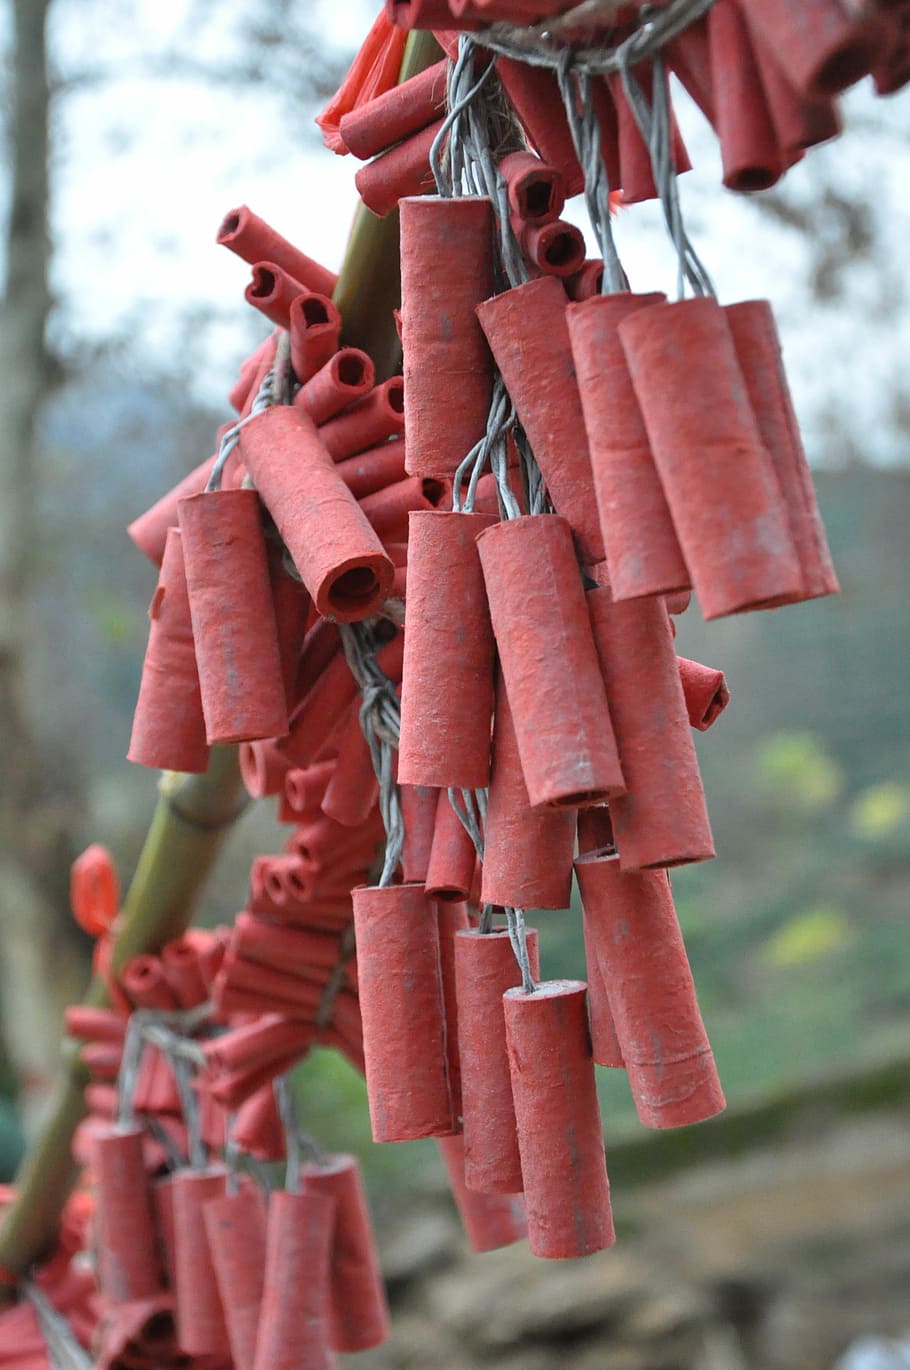 Firecracker, Festive, Scenery, Custom, hanging, outdoors, day, lock, close-up, red